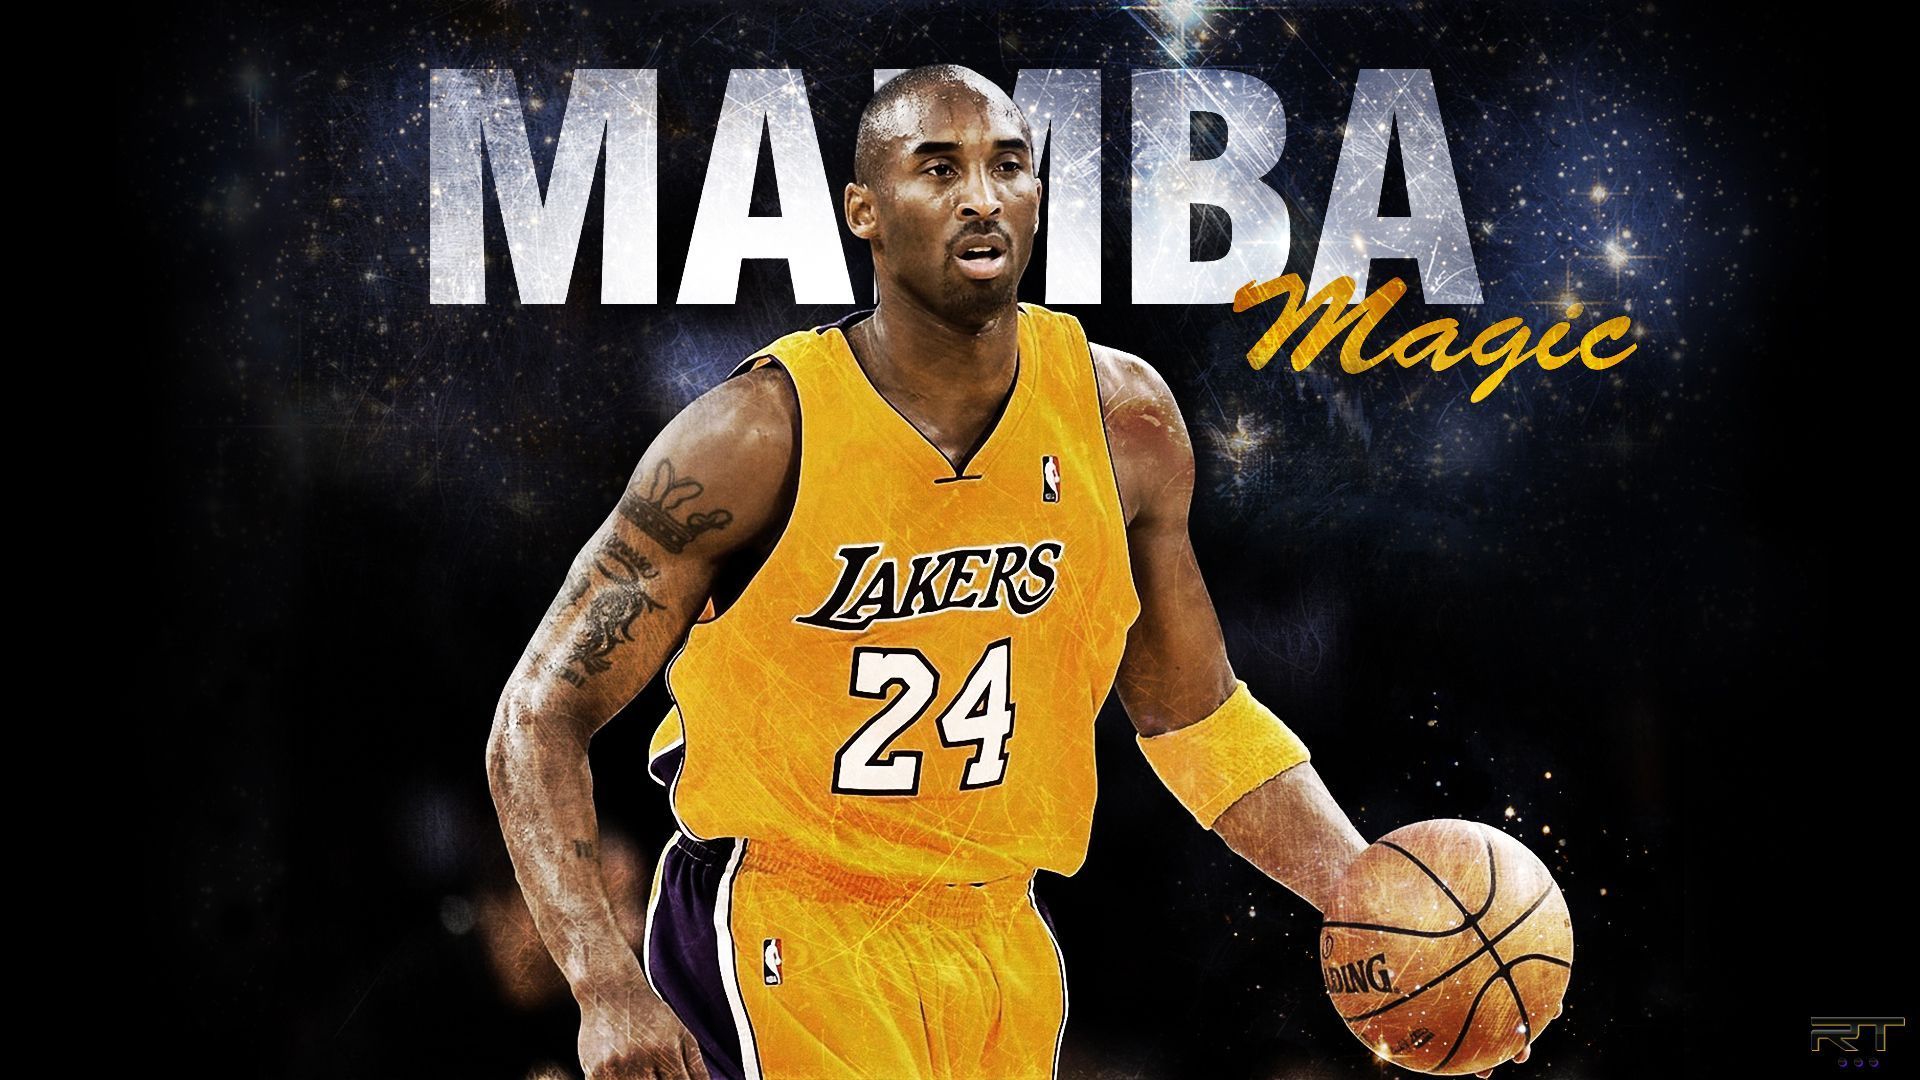 Kobe Bryant Wallpapers High Resolution and Quality Download